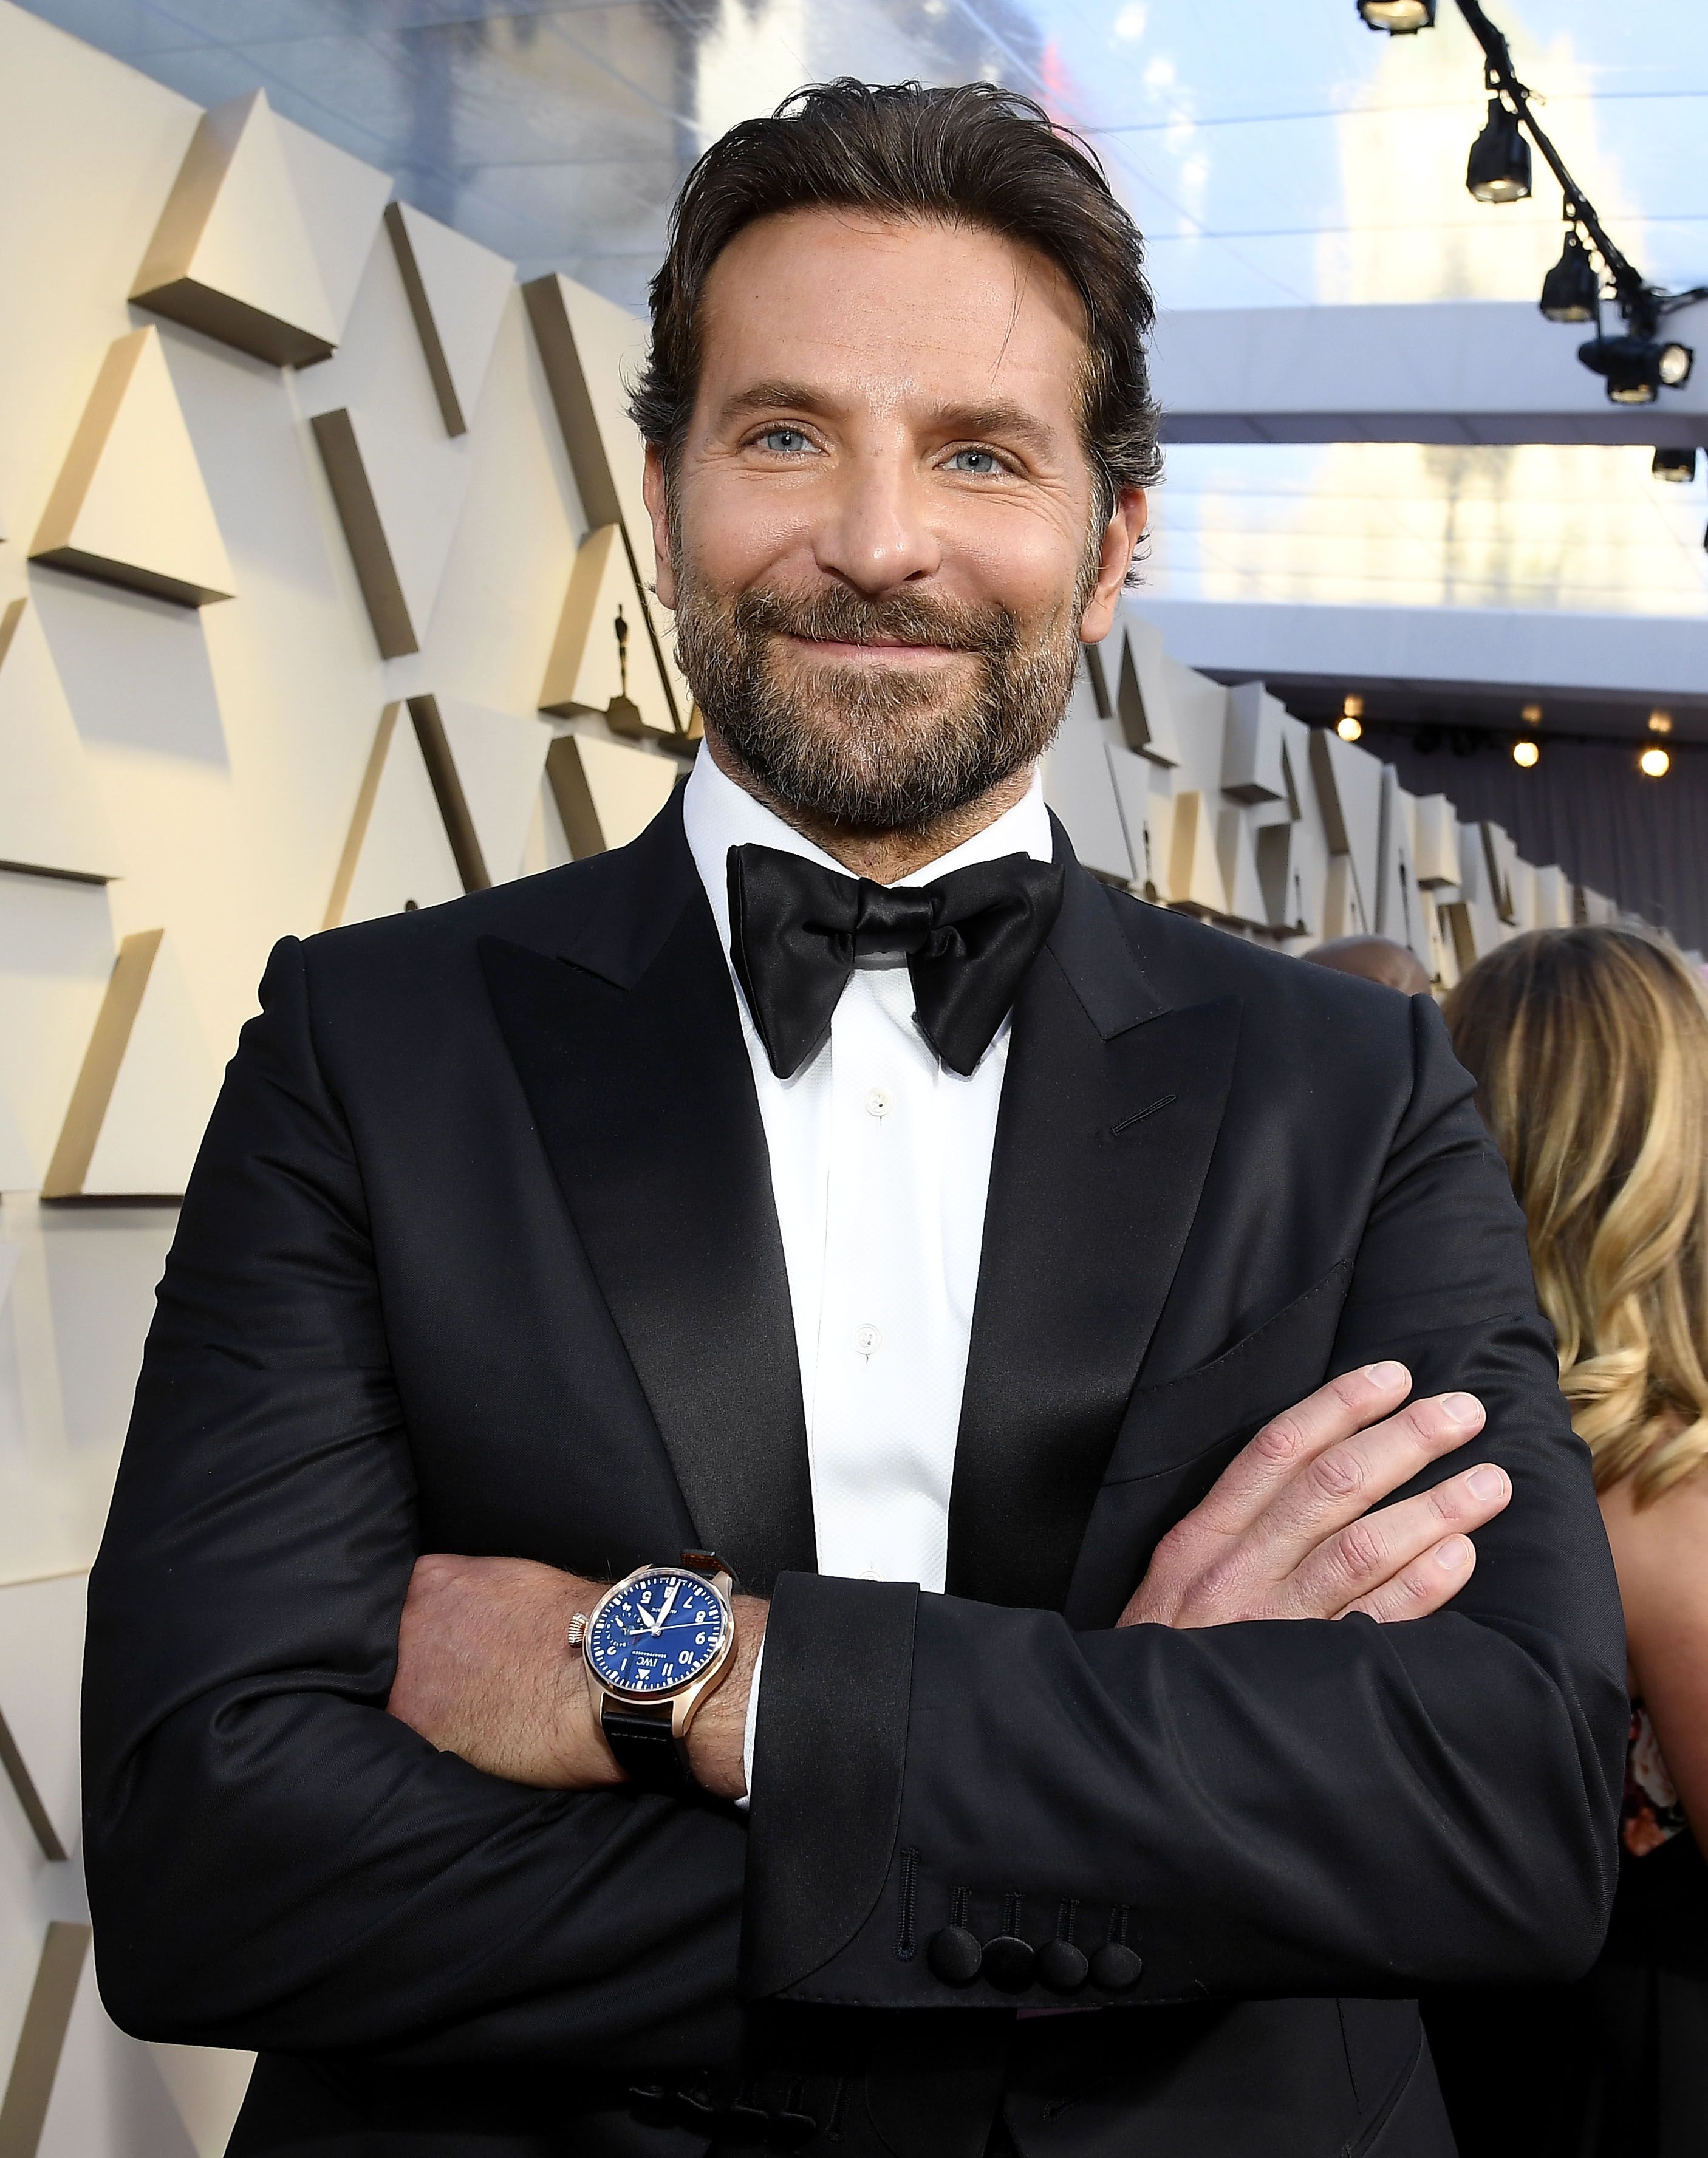 A Star is Born: Bradley Cooper's Grammy Awards Suit » BAMF Style